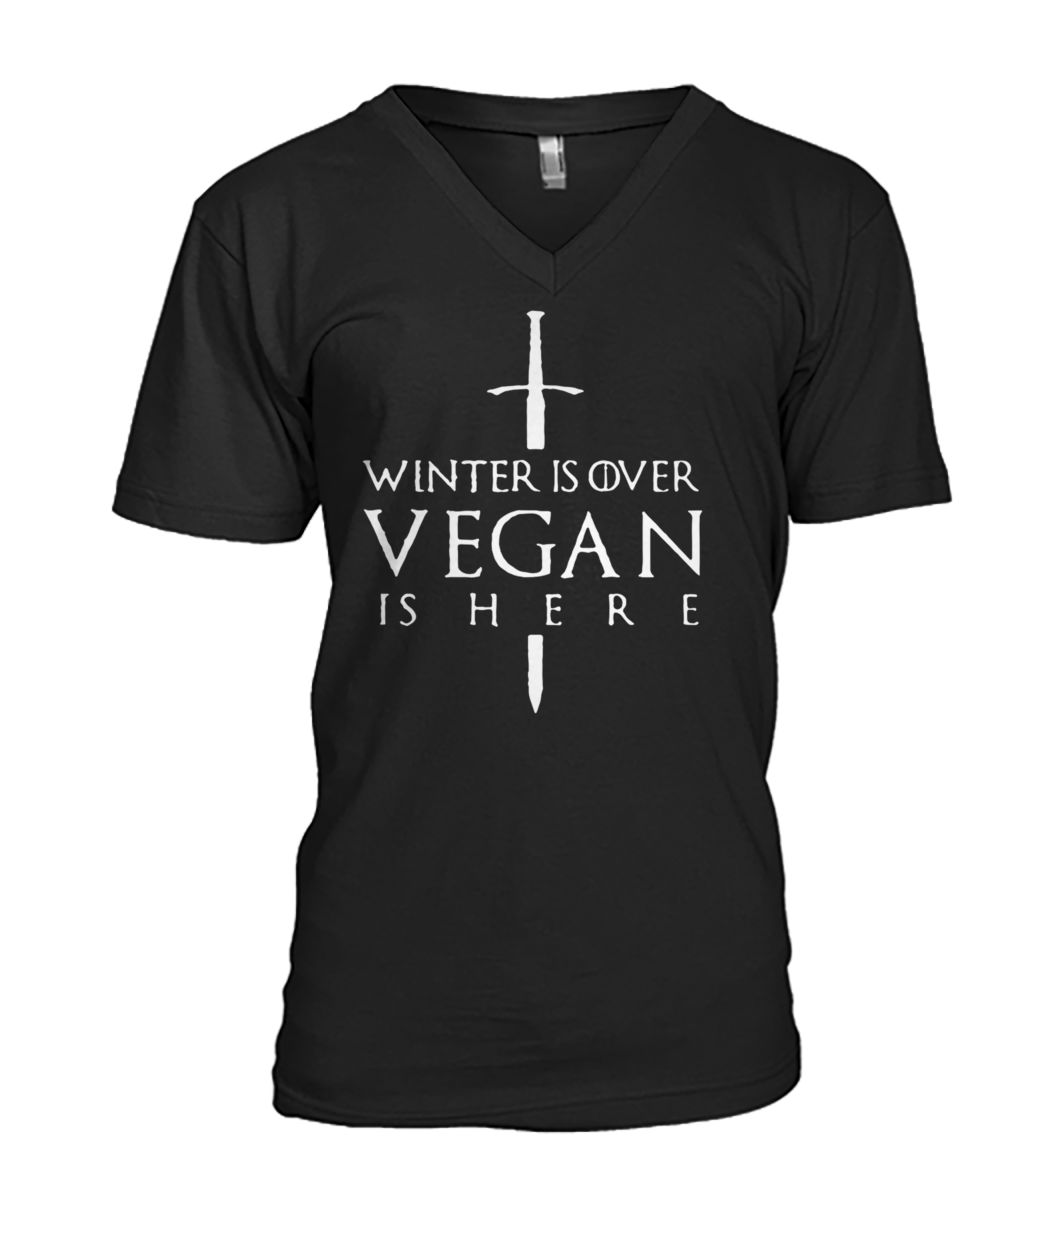 Game of thrones winter is over vegan is here mens v-neck